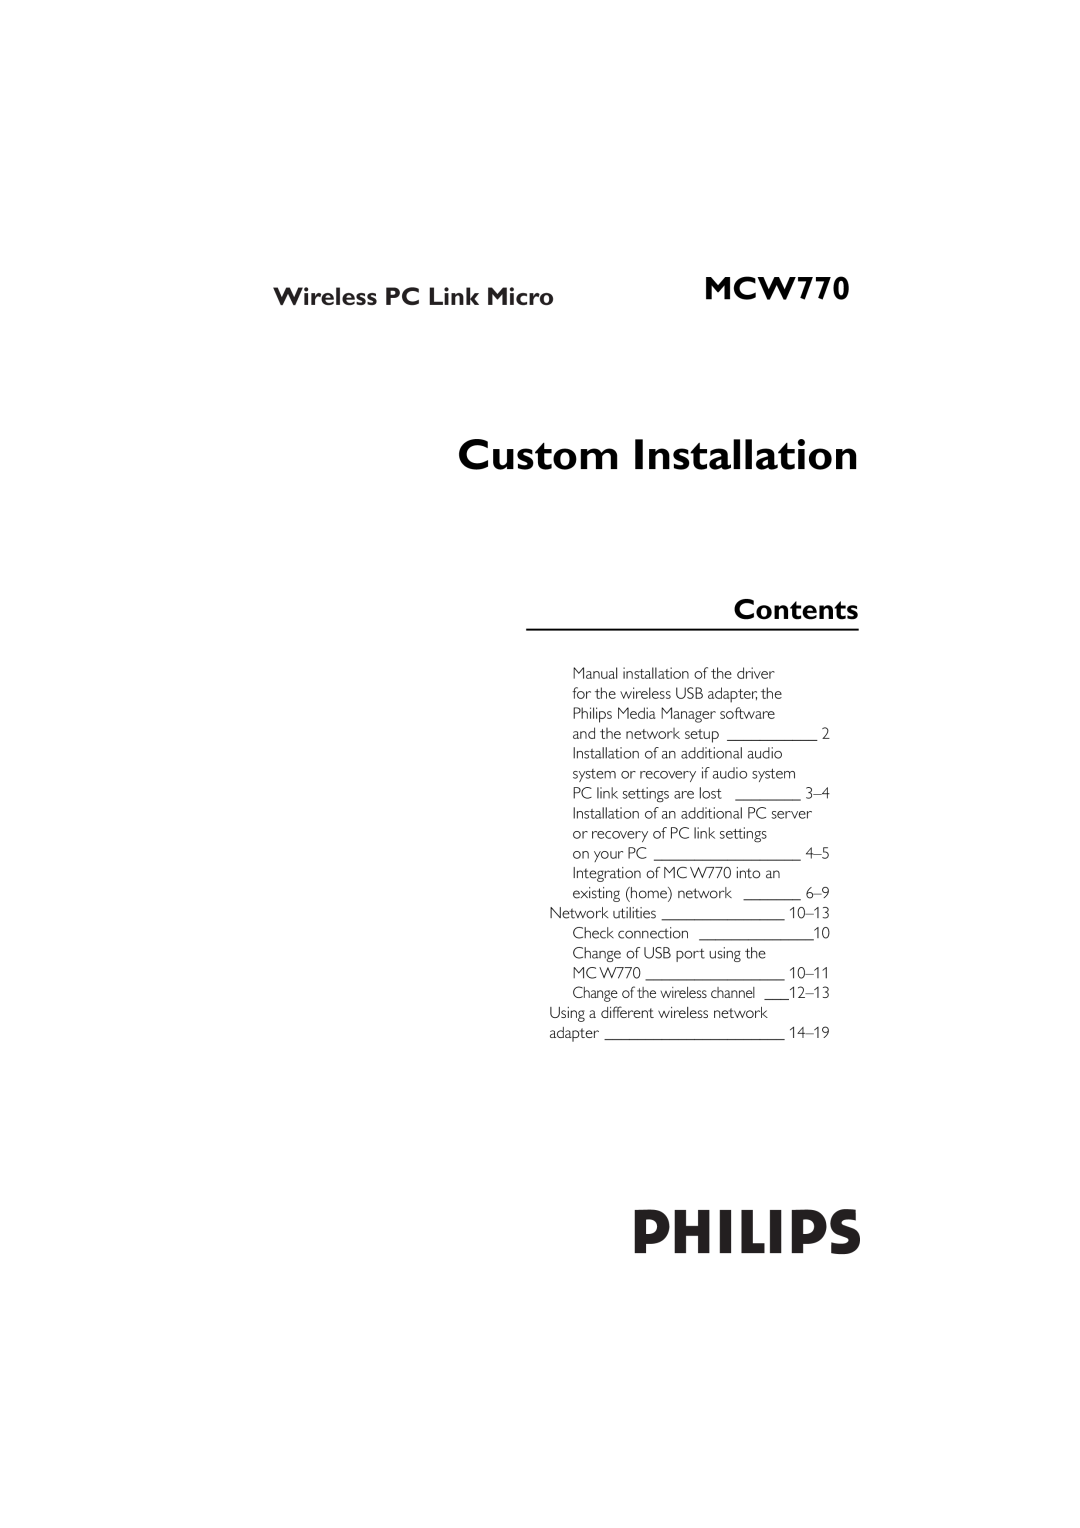 Philips manual Contents, MCW770M, Wireless PC Link Micro, Custom Installation 